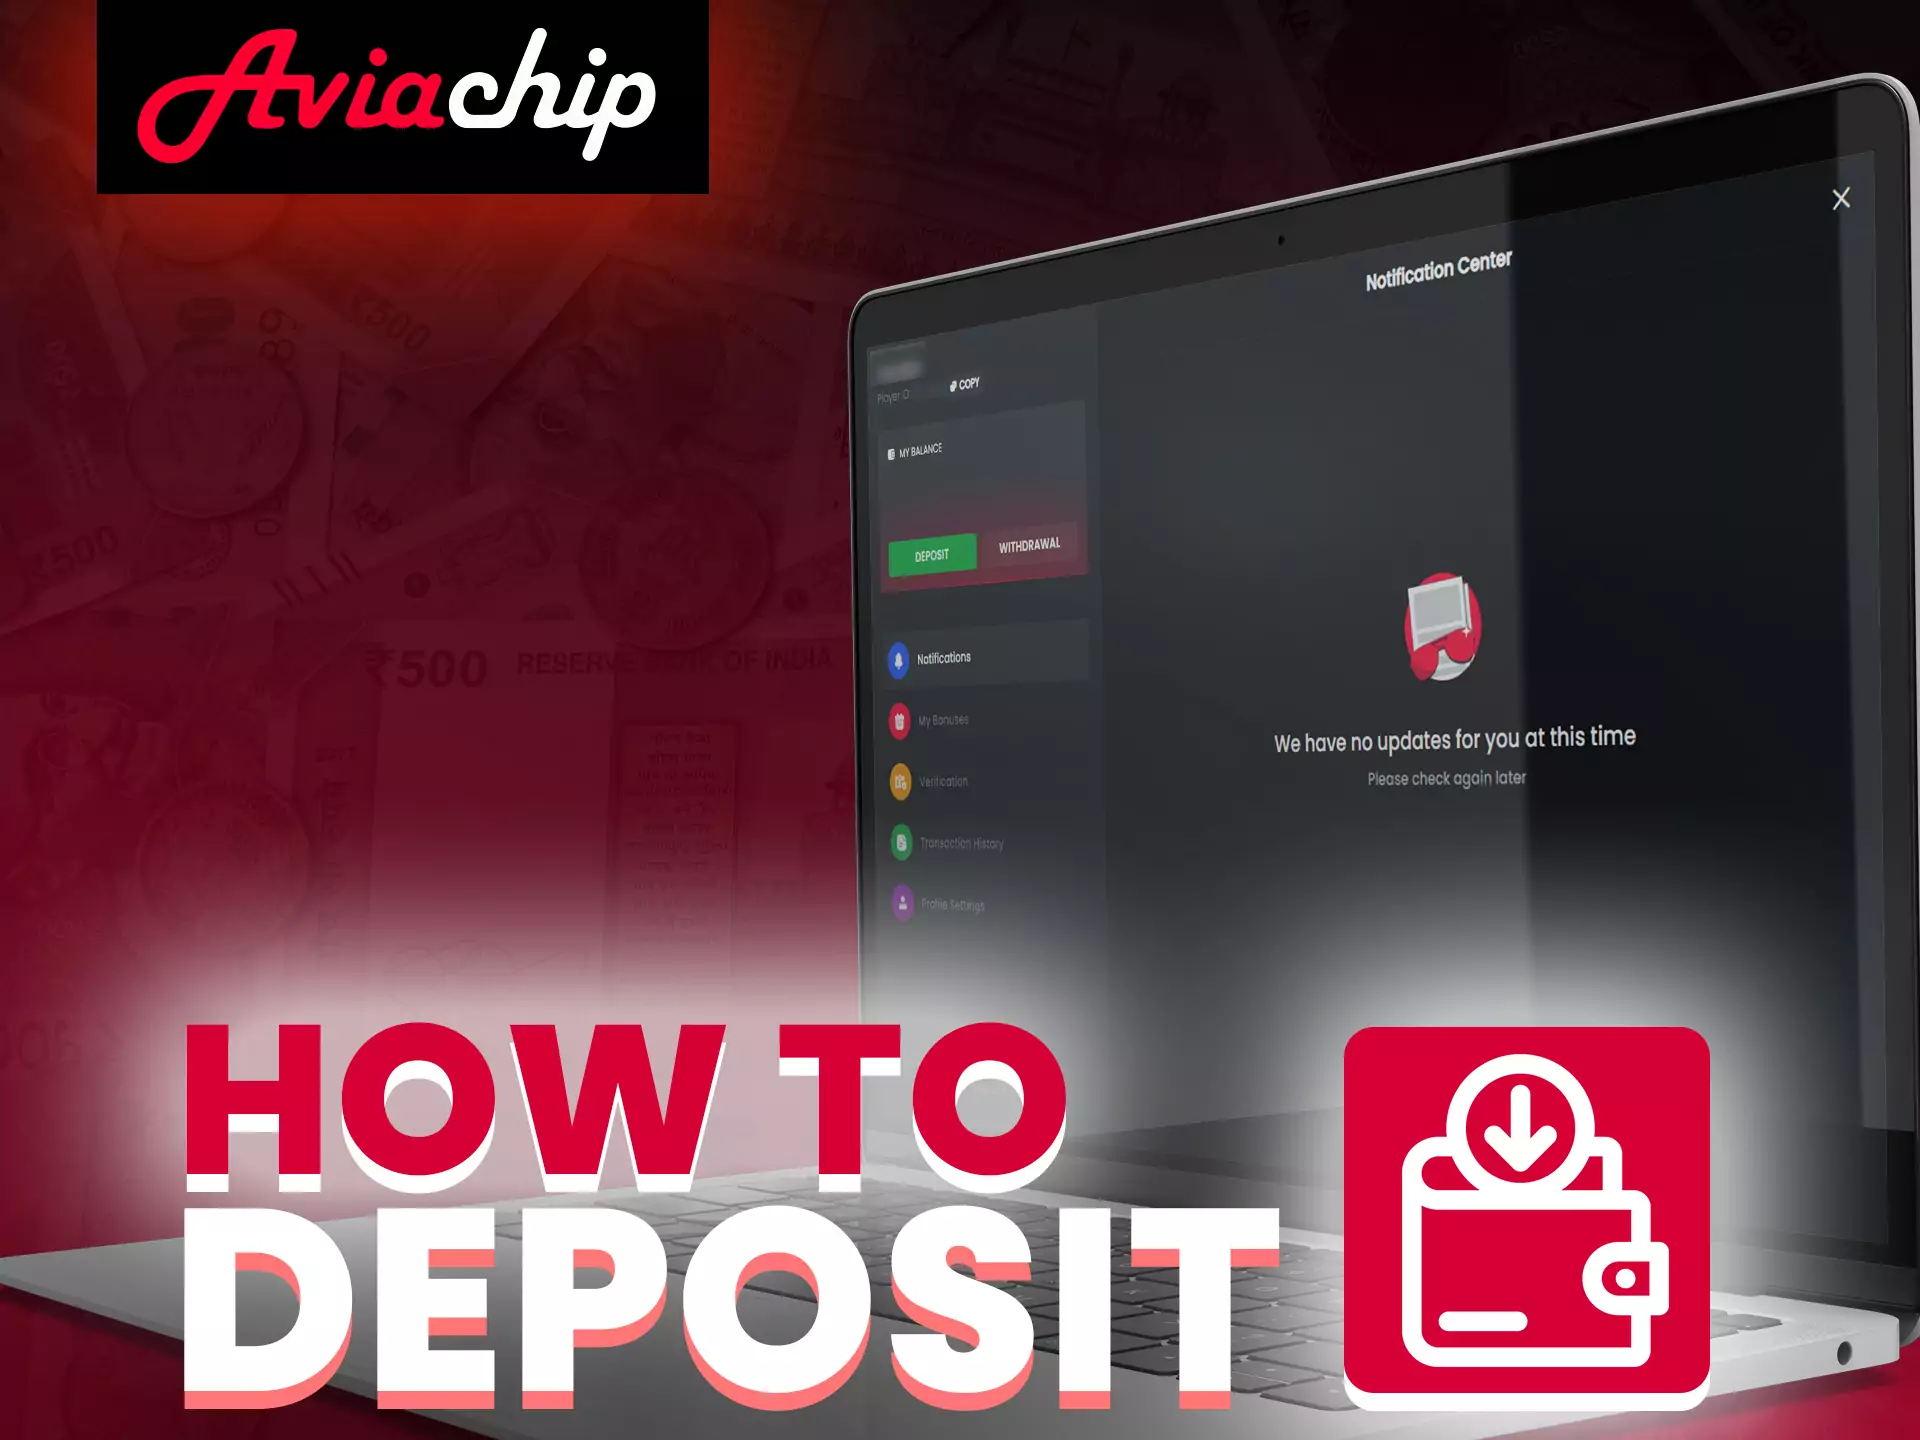 You can easily make a deposit on Aviachip.